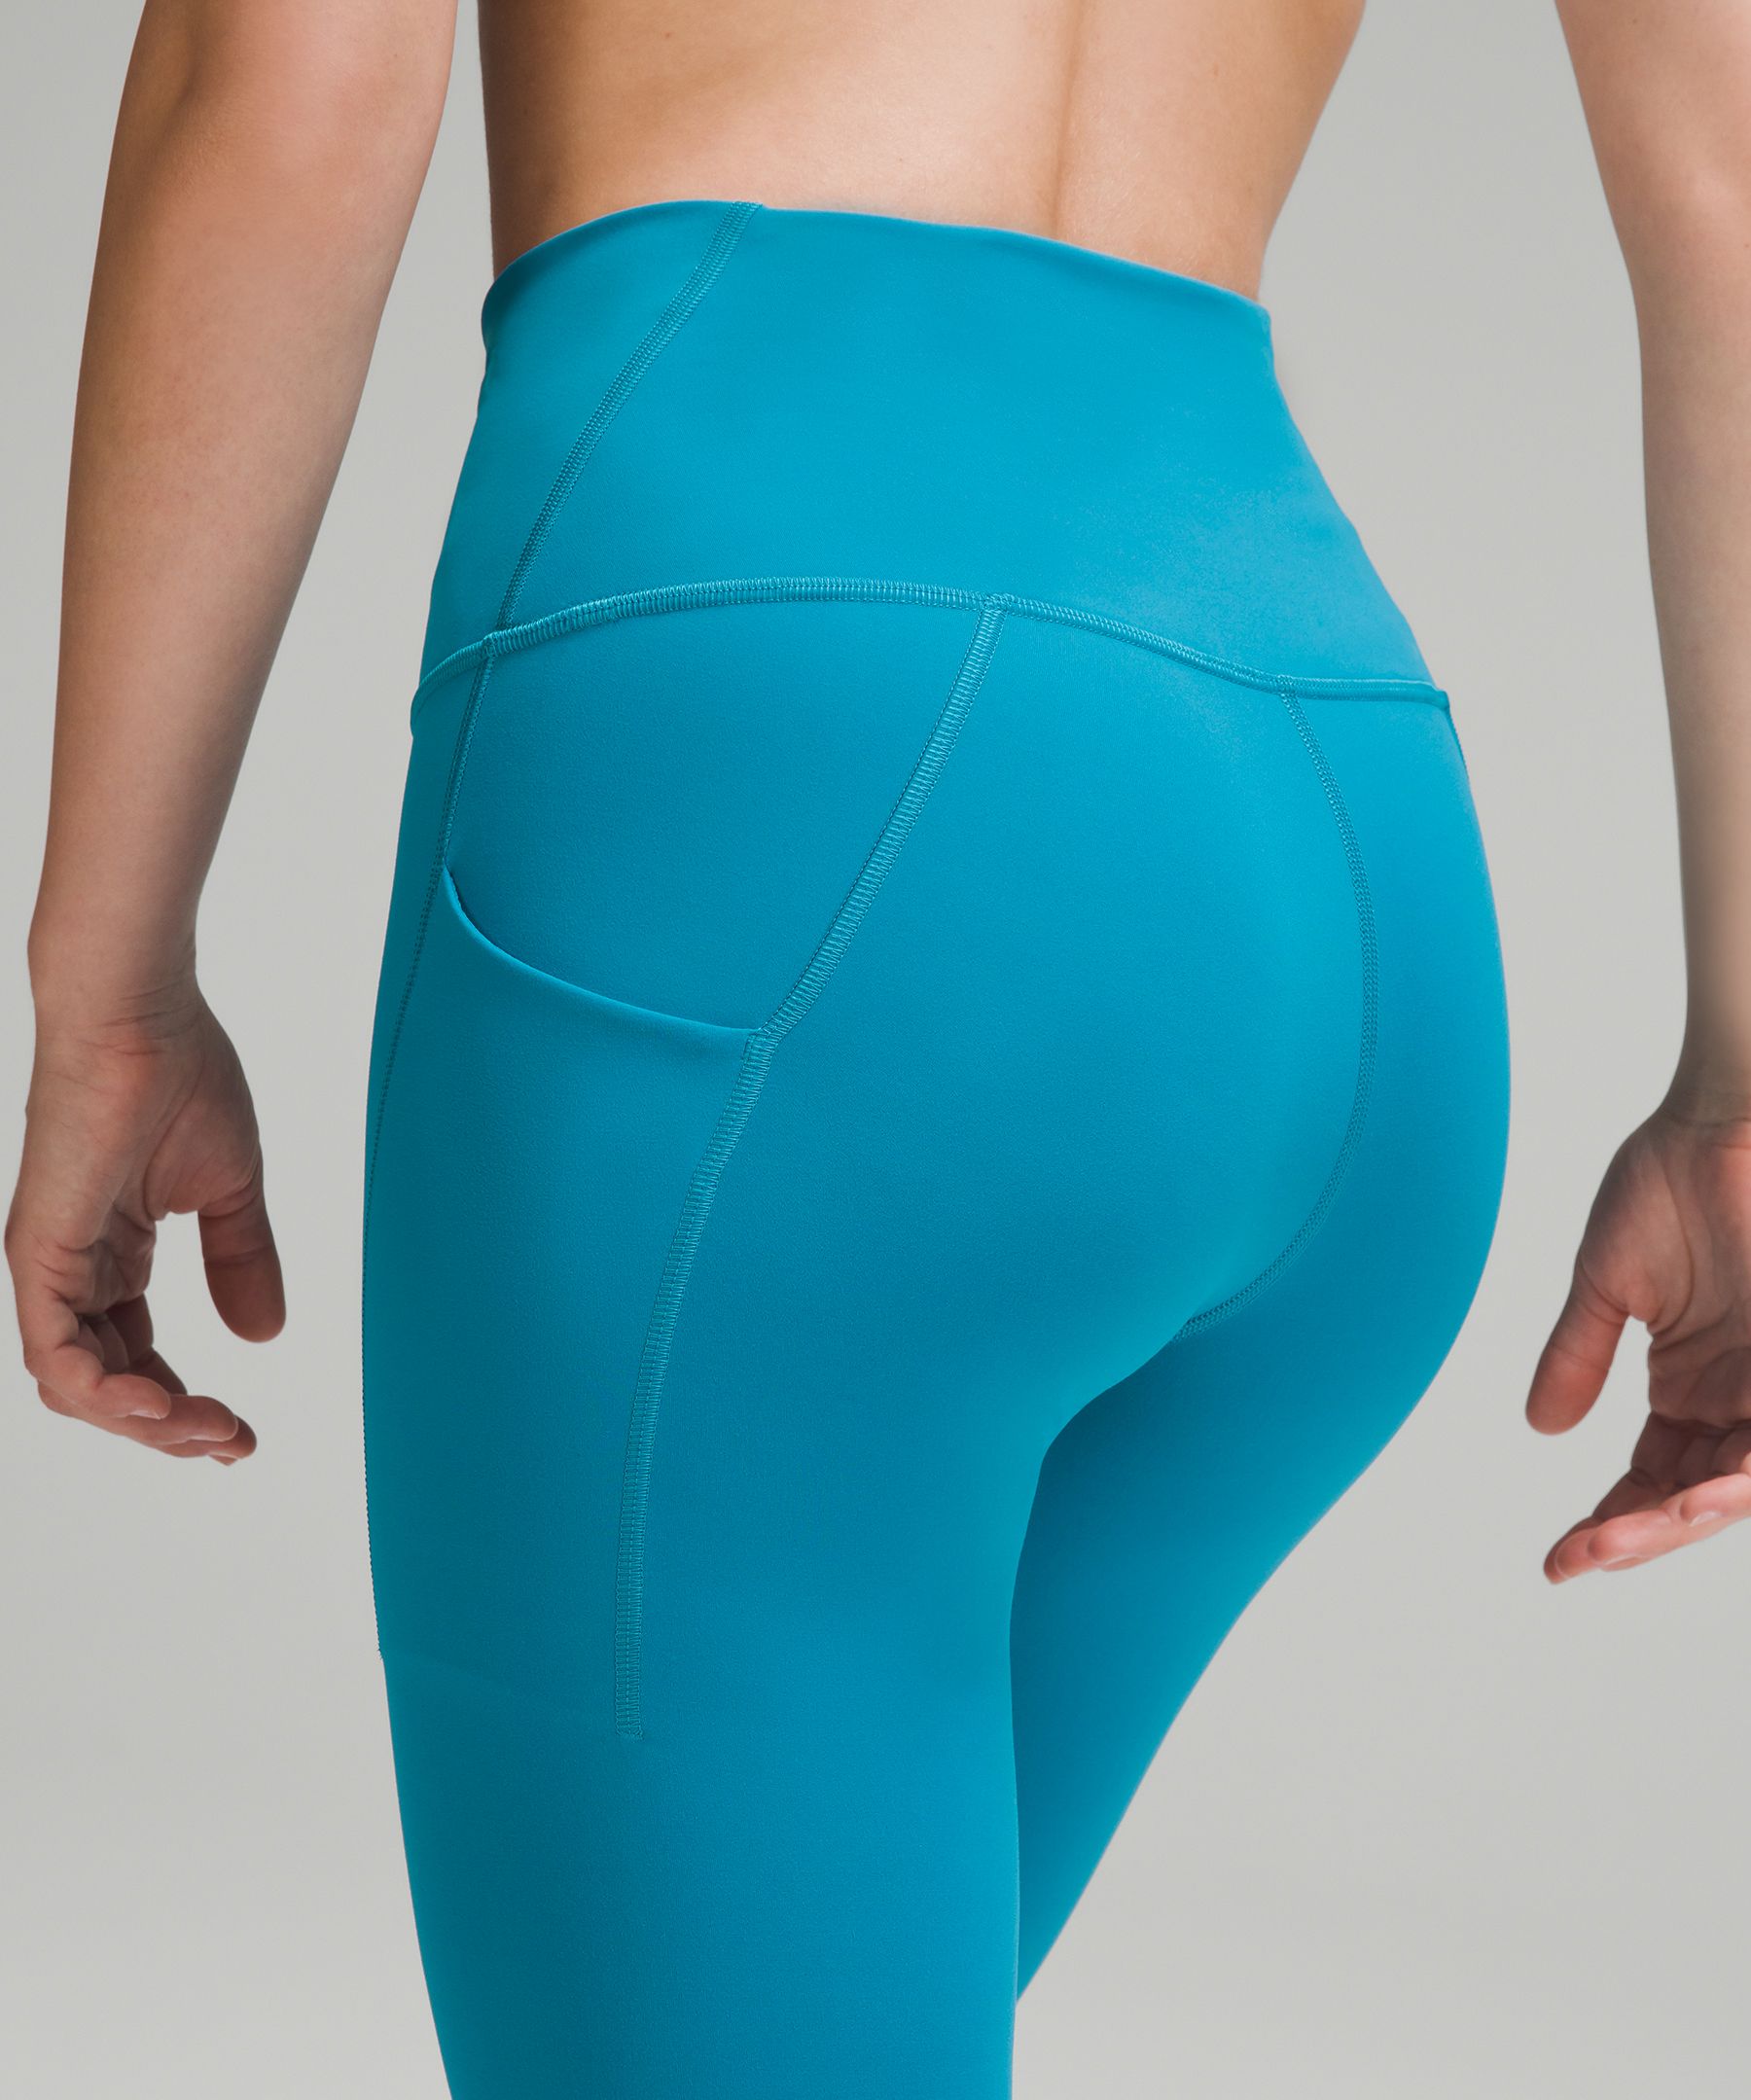 Wunder Train High-Rise Tight with Pockets 28